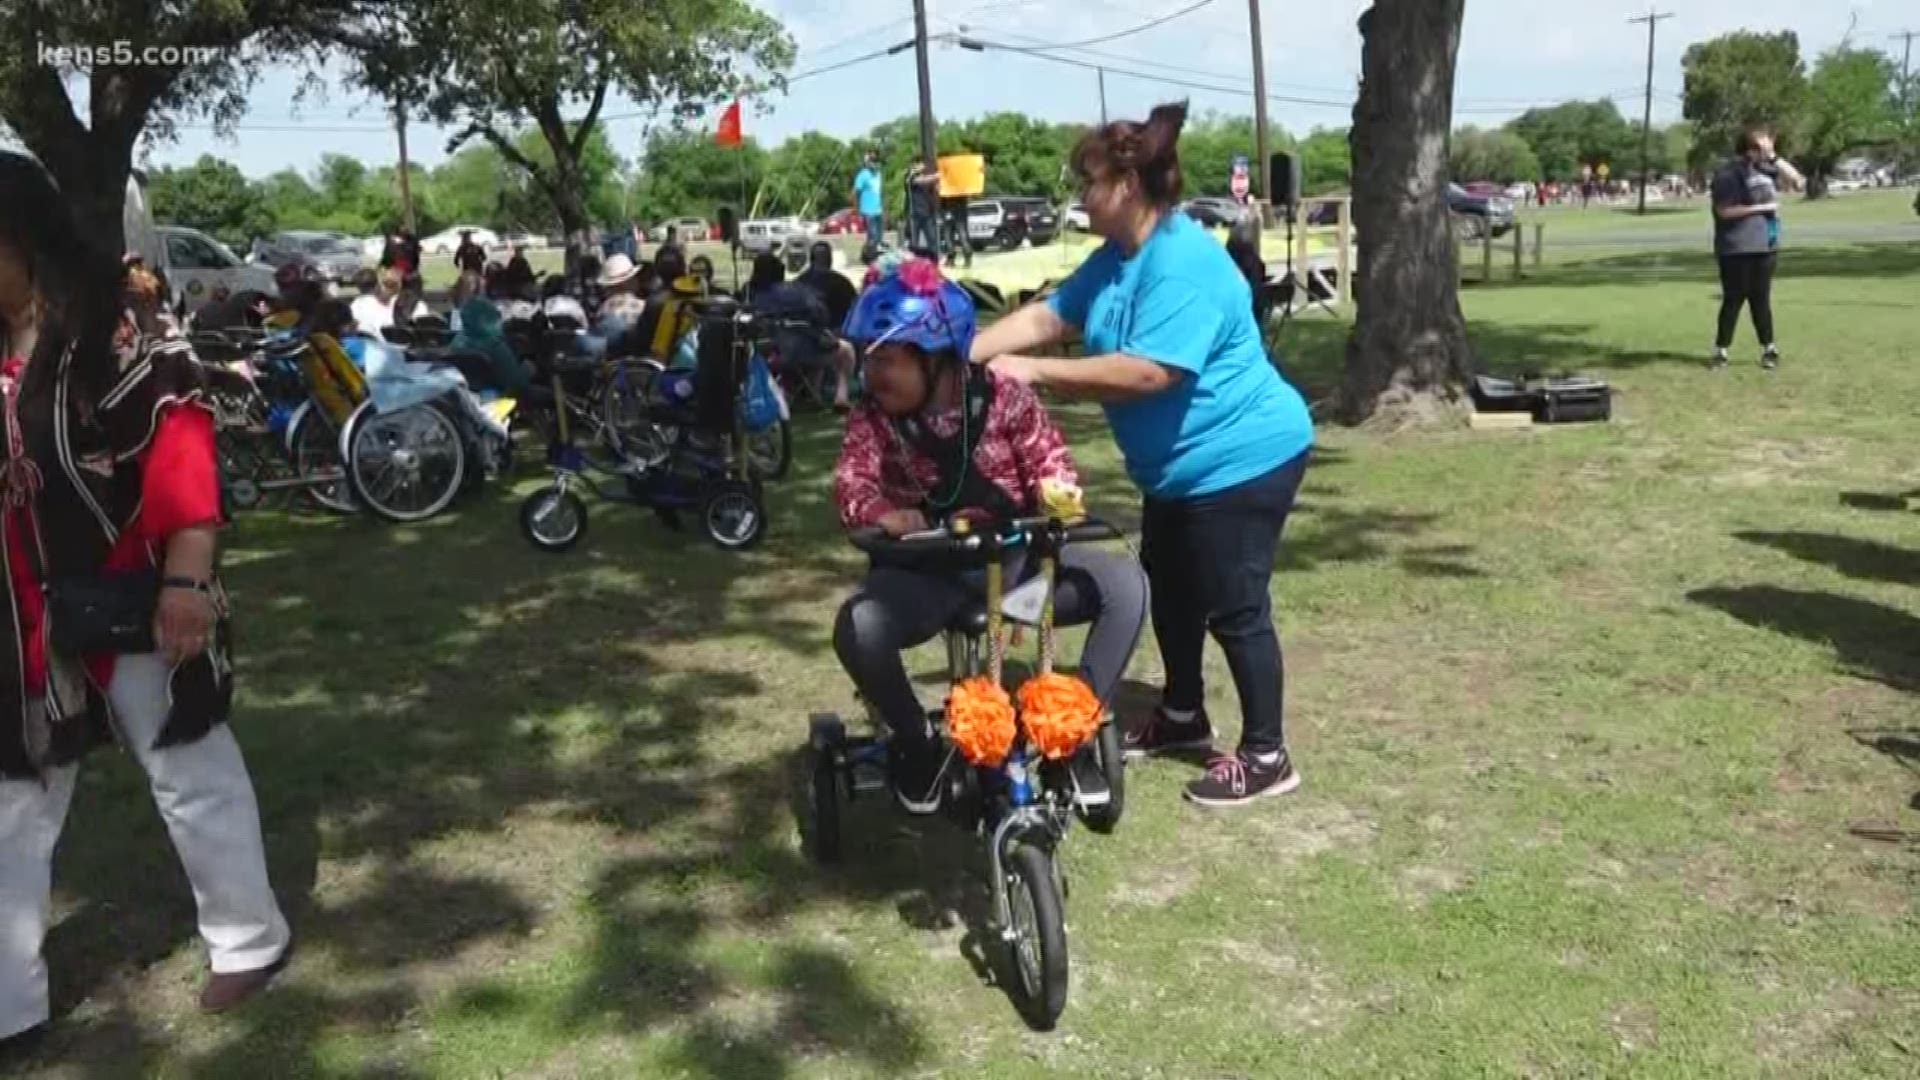 Two new bikes for special needs students at Harlandale ISD made their debut at the 42nd Annual Cultural Arts Festival.